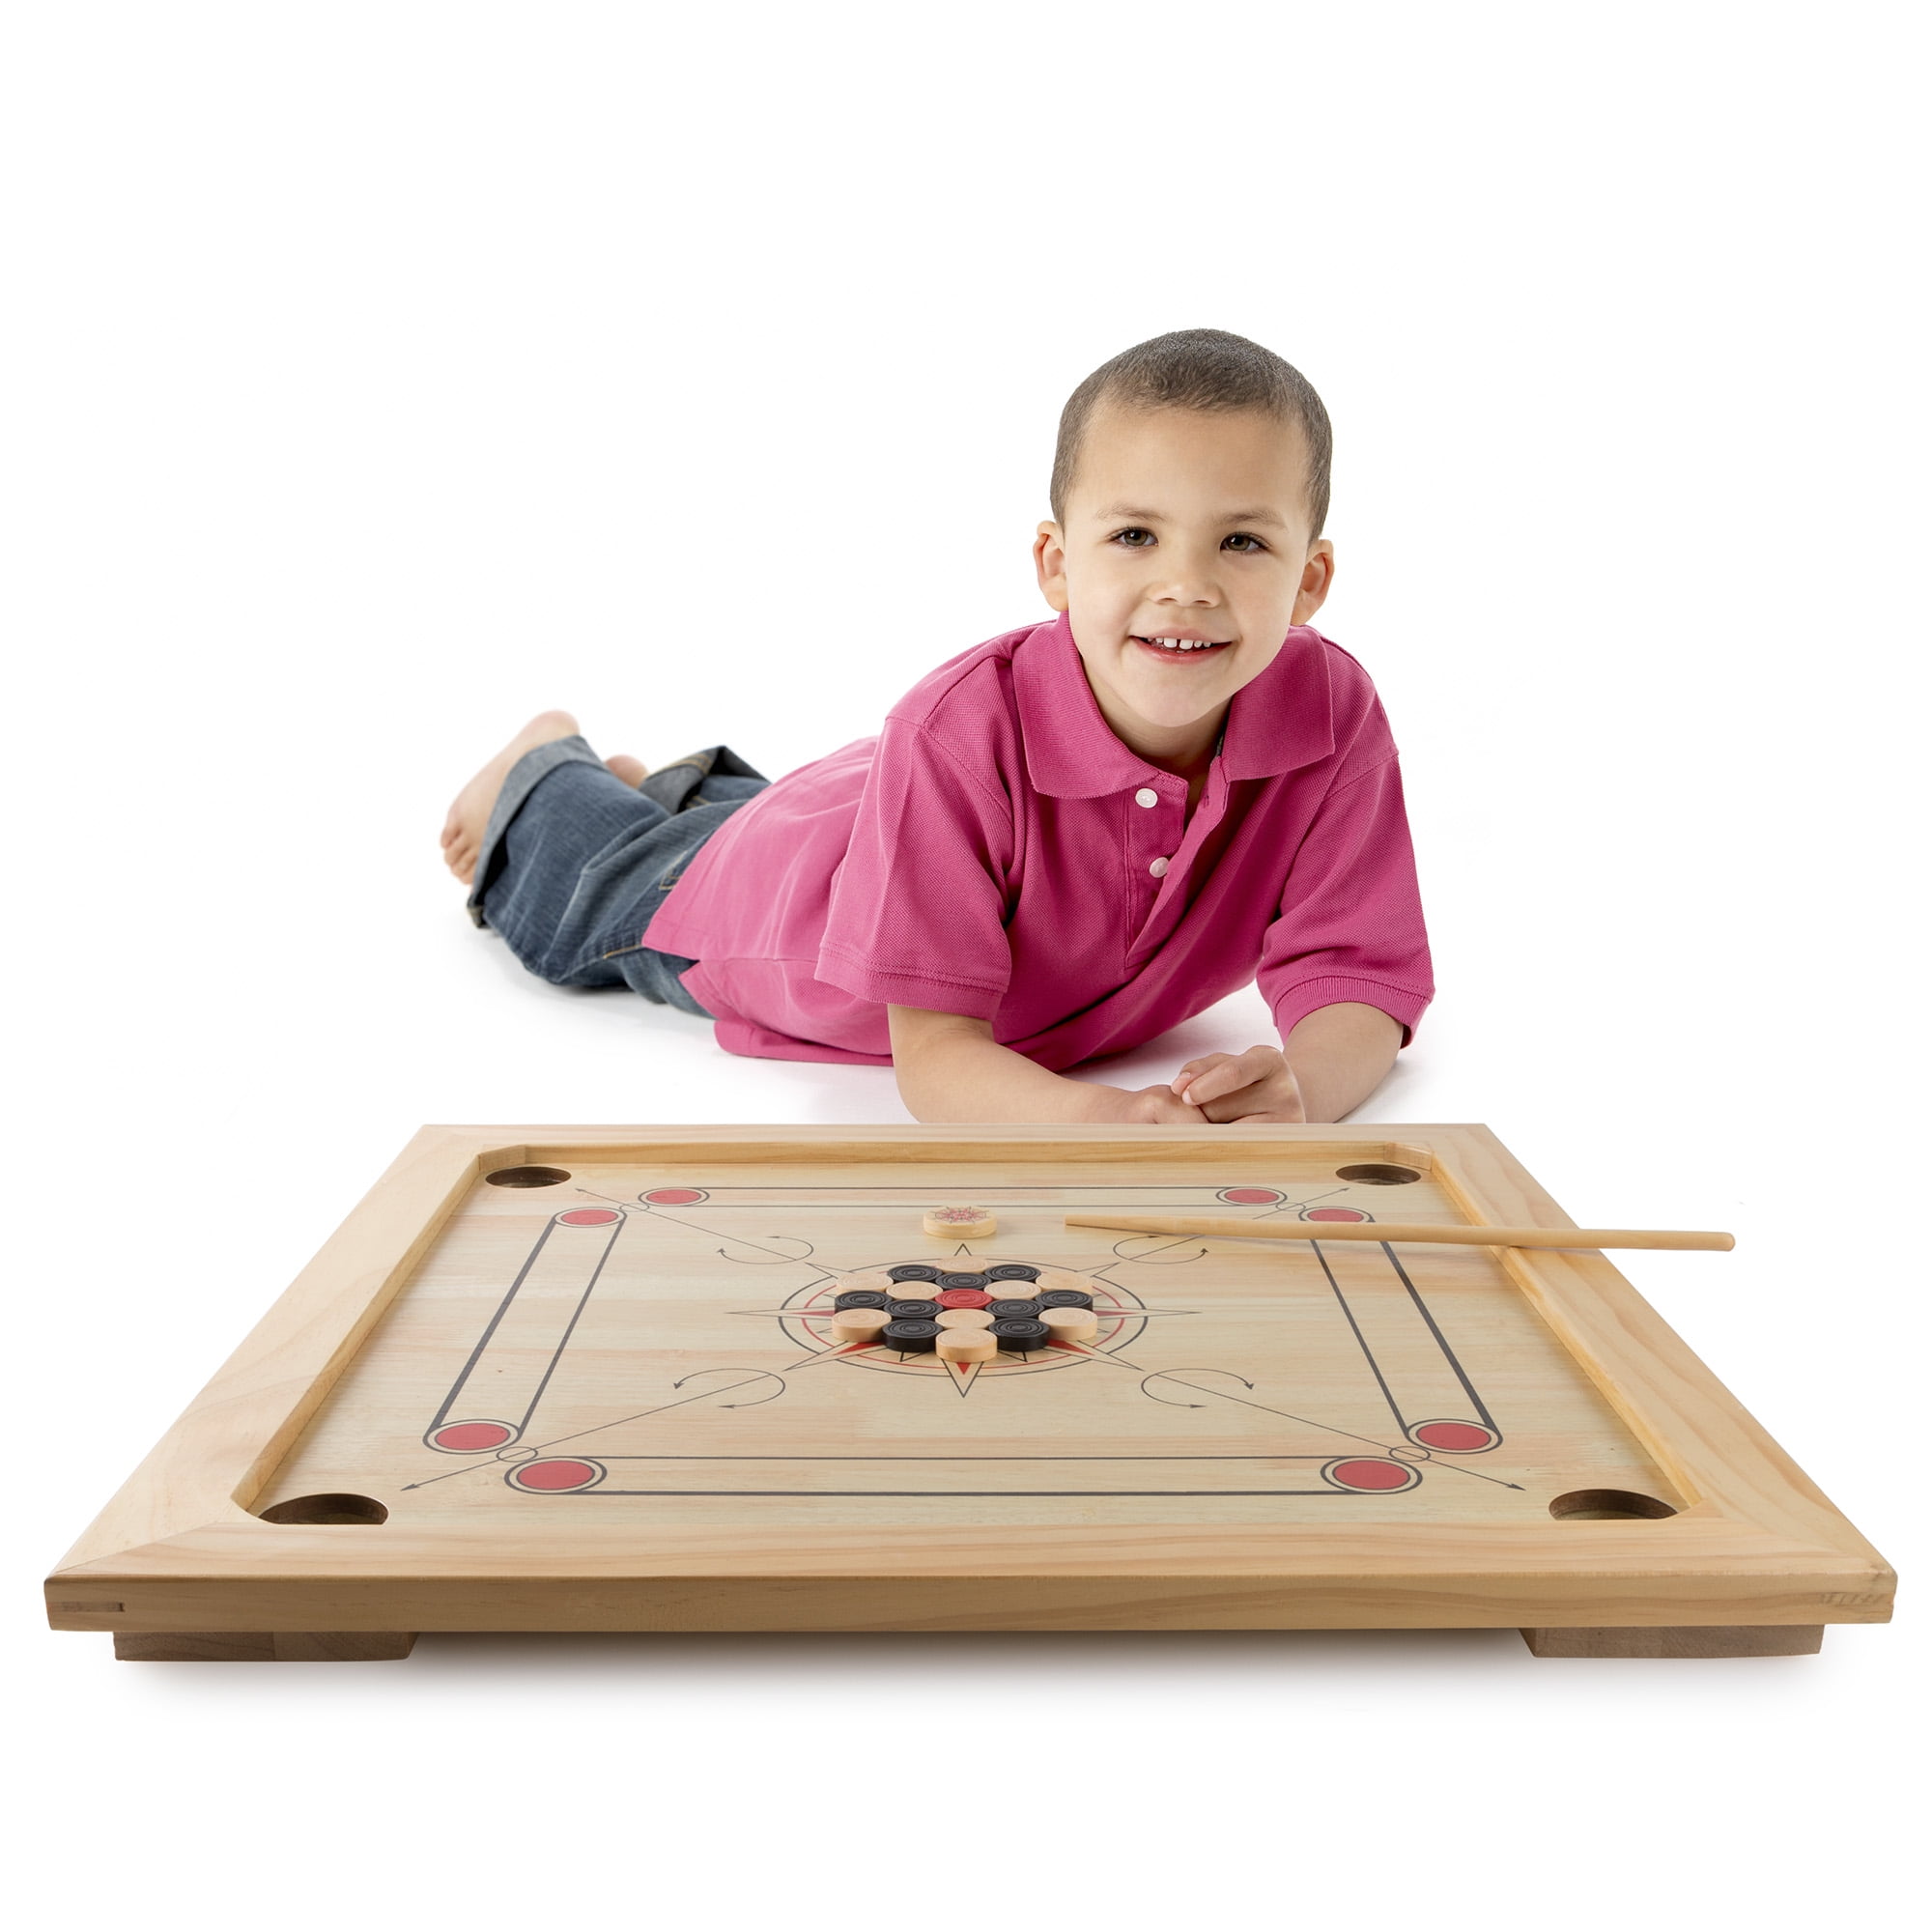 Details about   Pro 33" Large Carrom Board Wooden Game With Coins & Striker 296-AOMH 